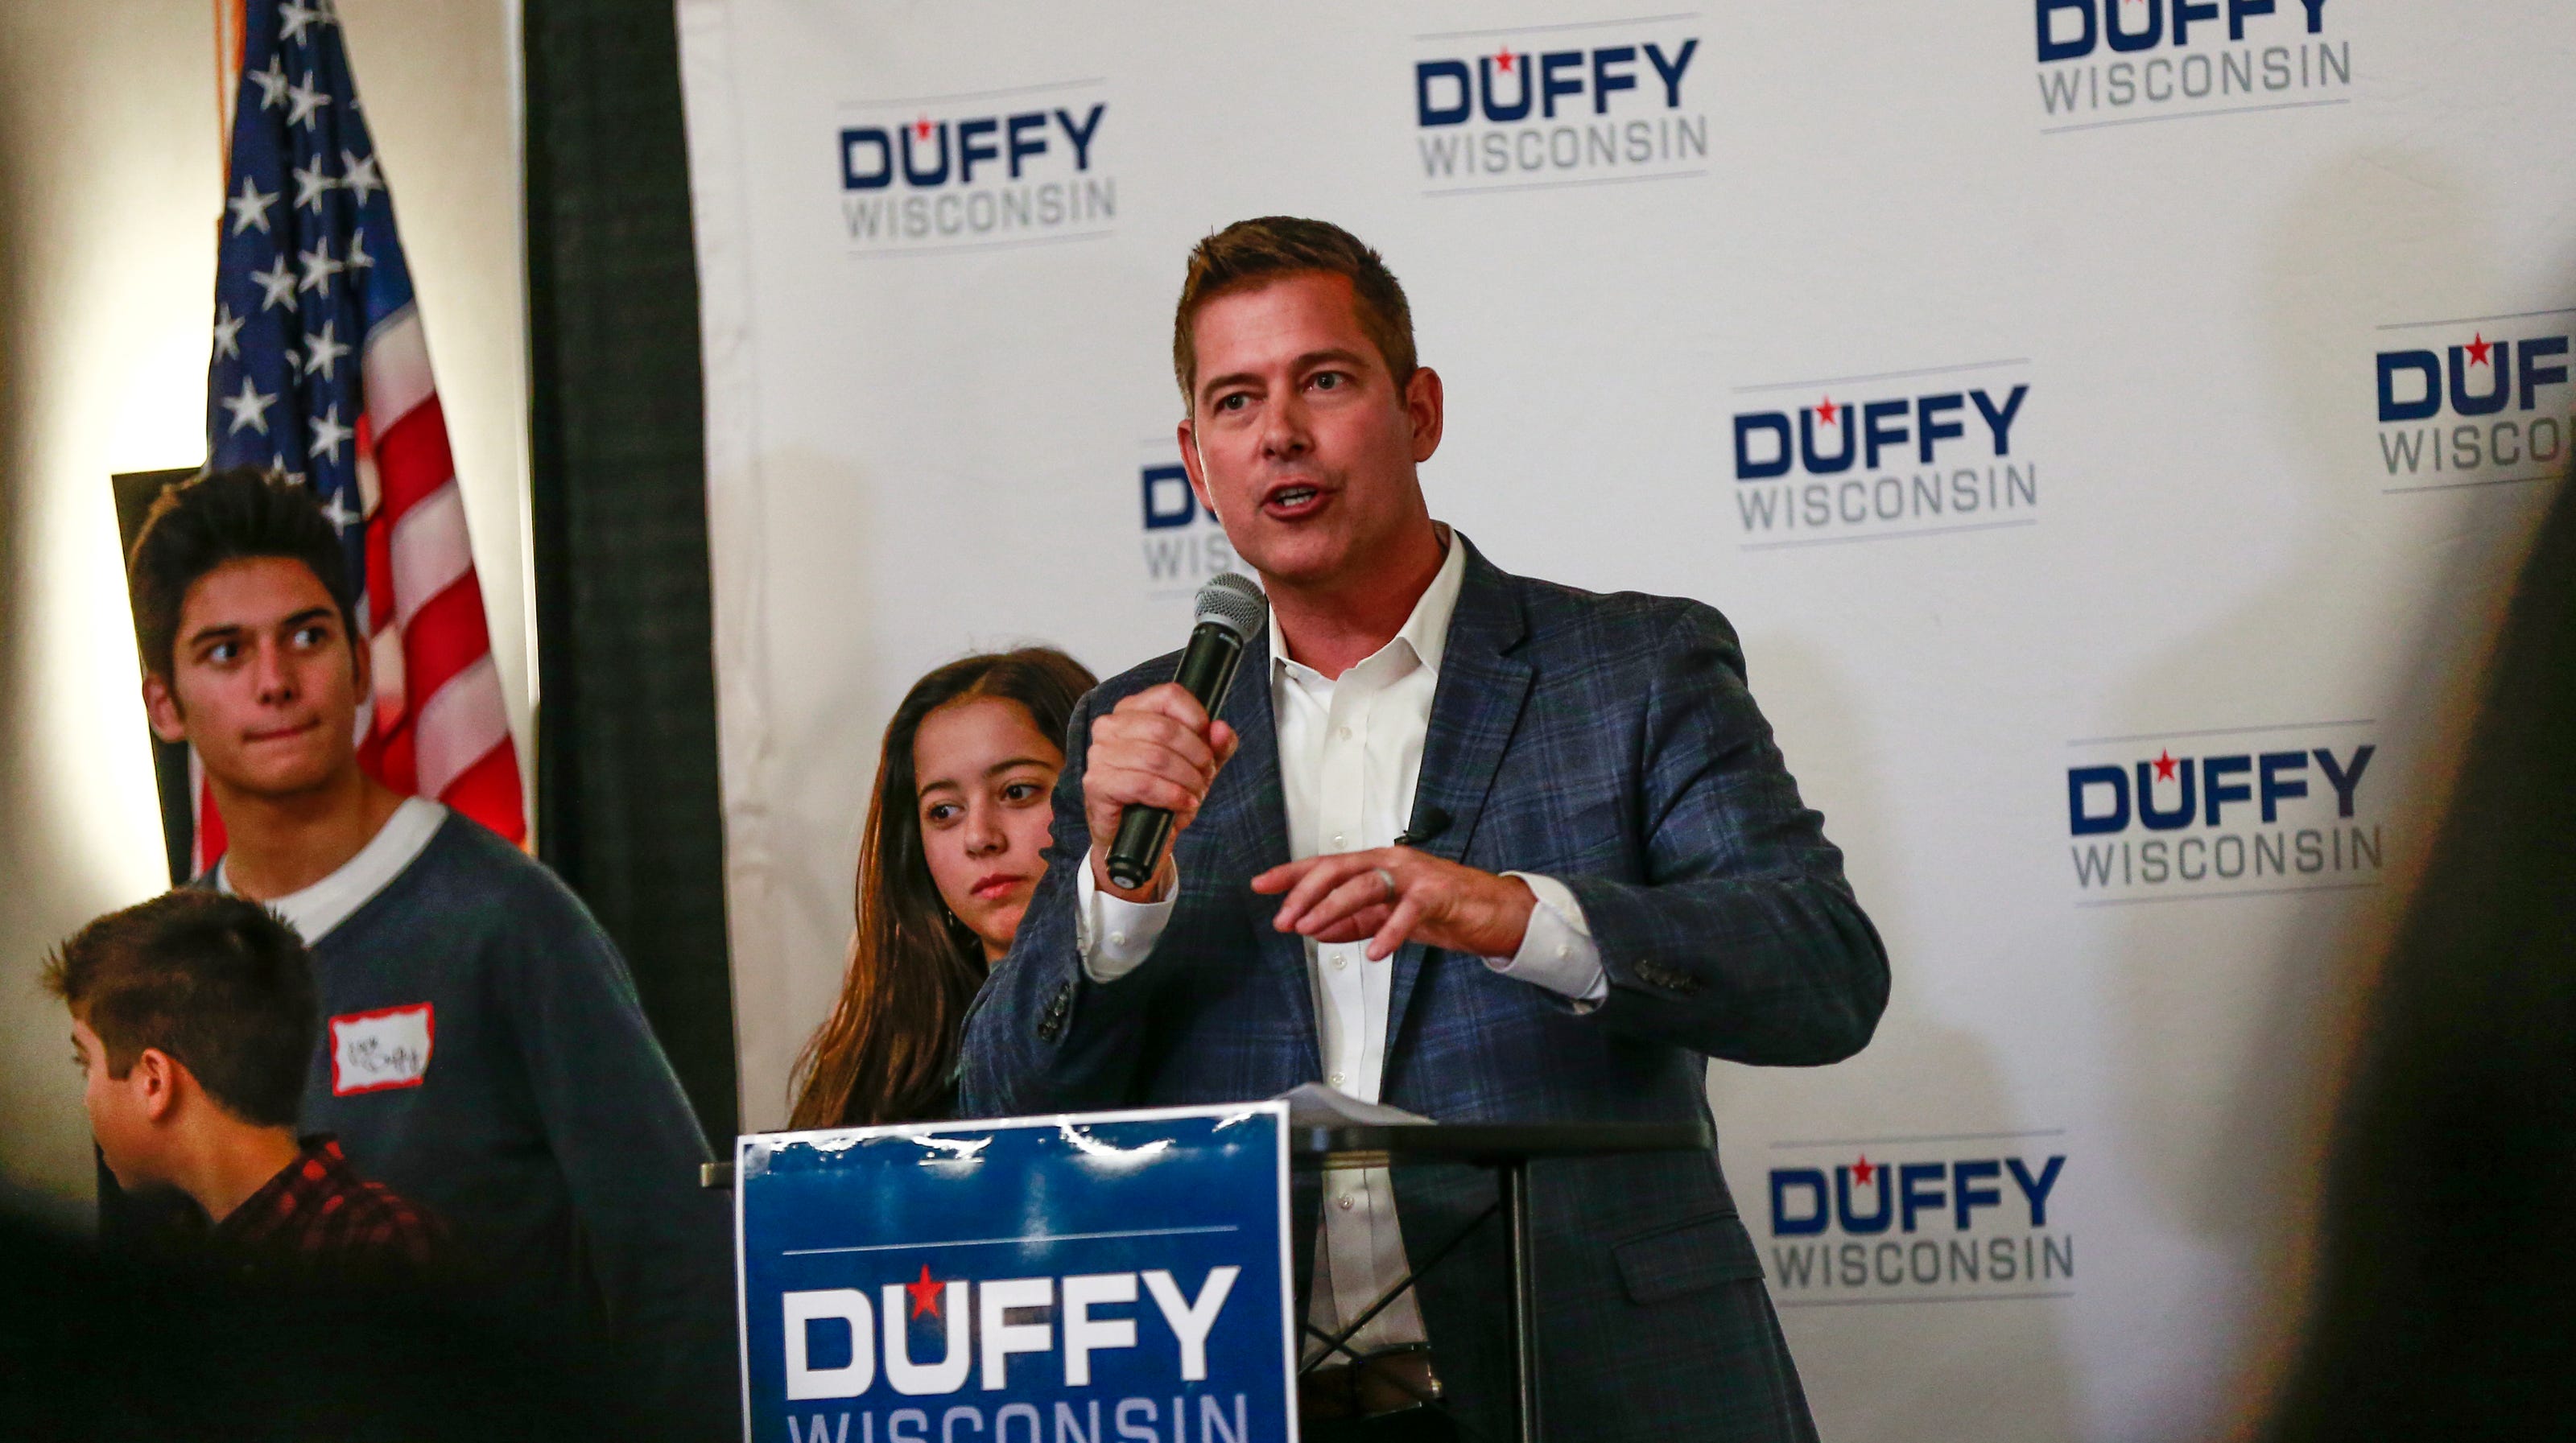 Aktiver zoom Bore Sean Duffy takes senior counsel job with D.C. lobbying firm BGR Group